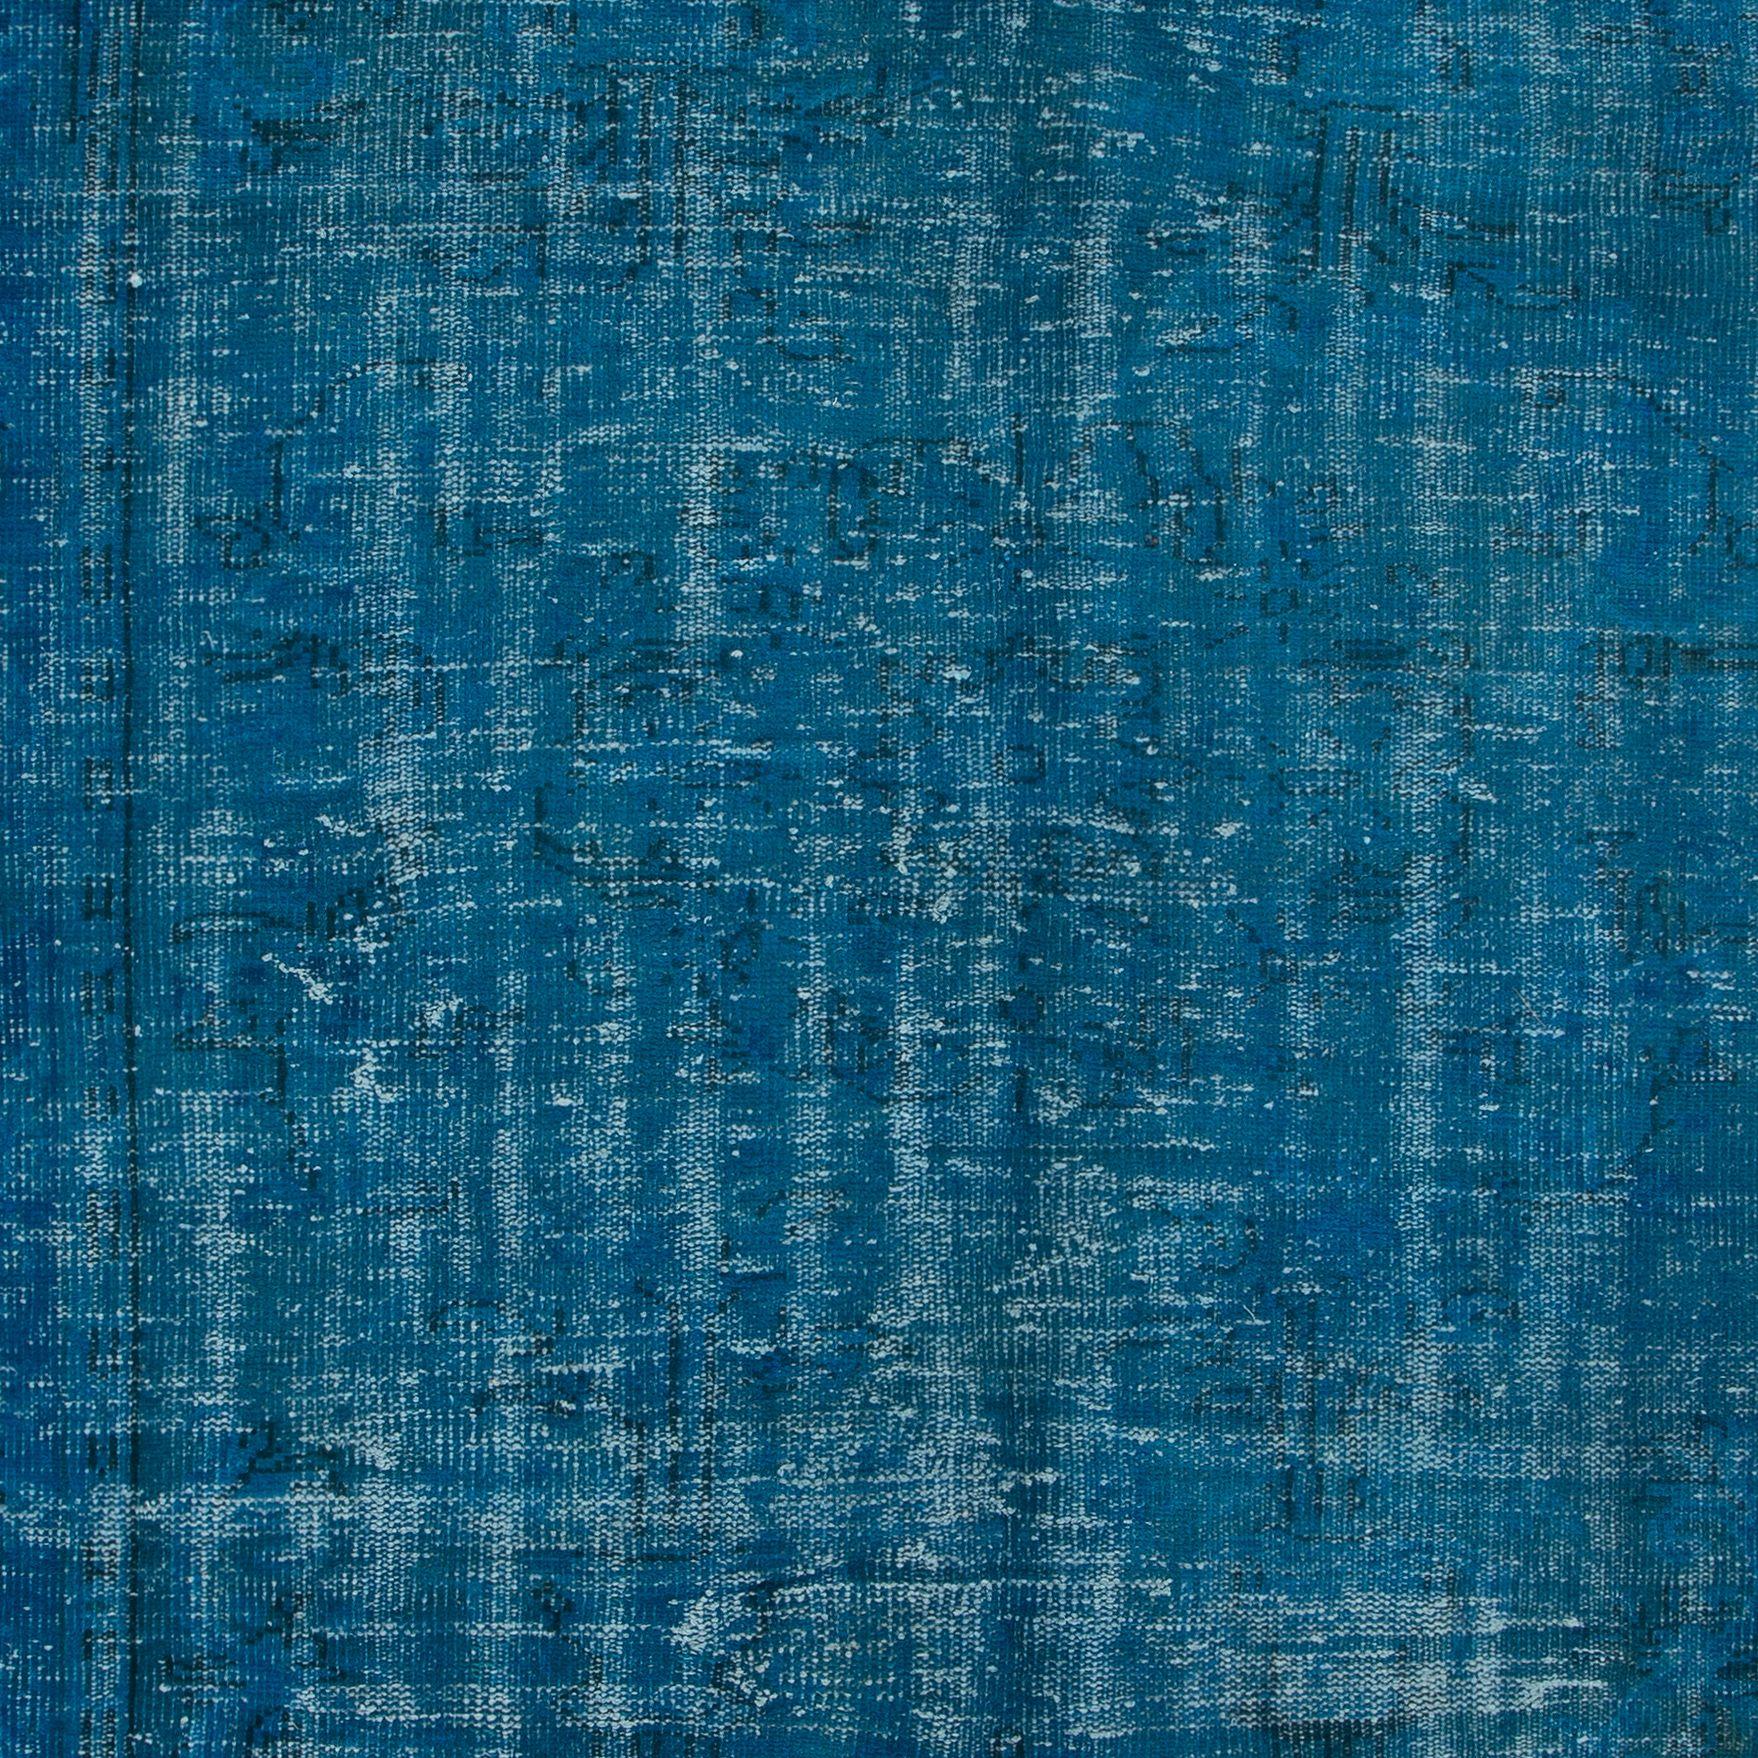 Turkish 5.8x8.6 Ft Overdyed Blue Area Rug, Handmade in Turkey, Modern Upcycled Carpet For Sale